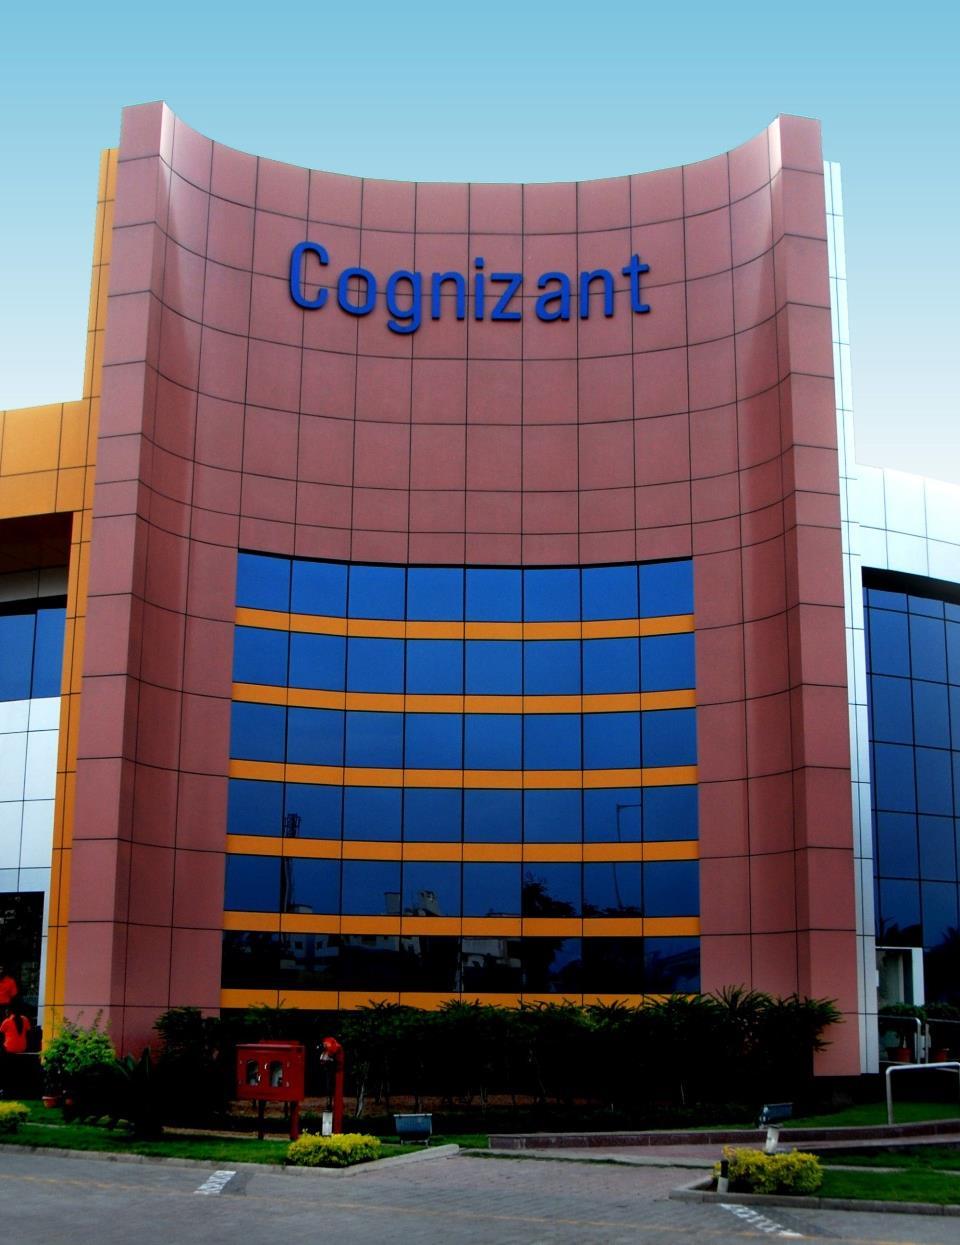 Who is Cognizant?